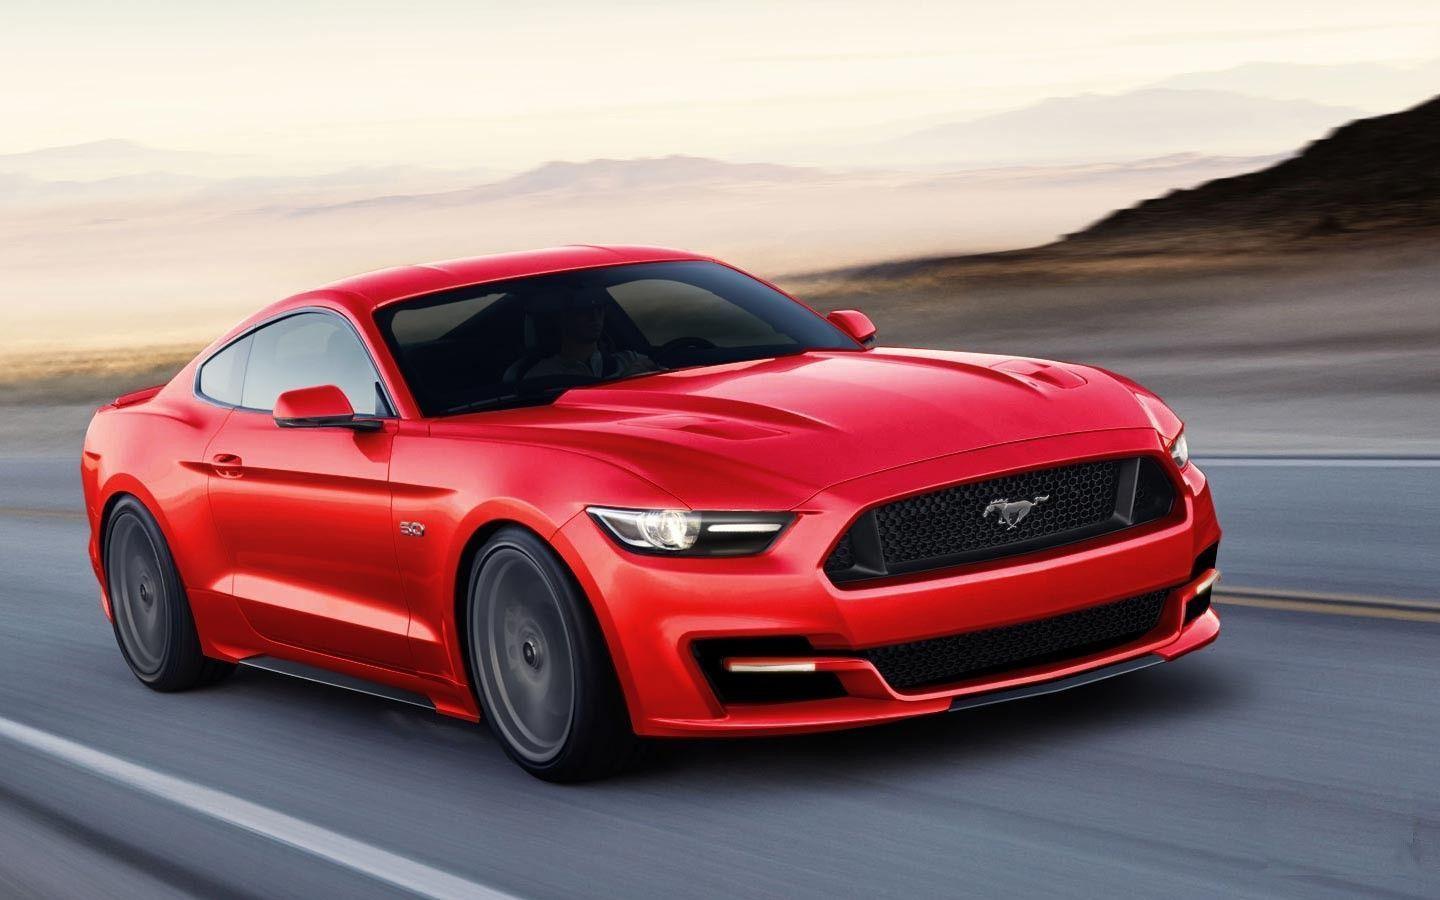 Cool Ford Mustang GT 2015 Wallpaper Wallpaper 100% High Quality